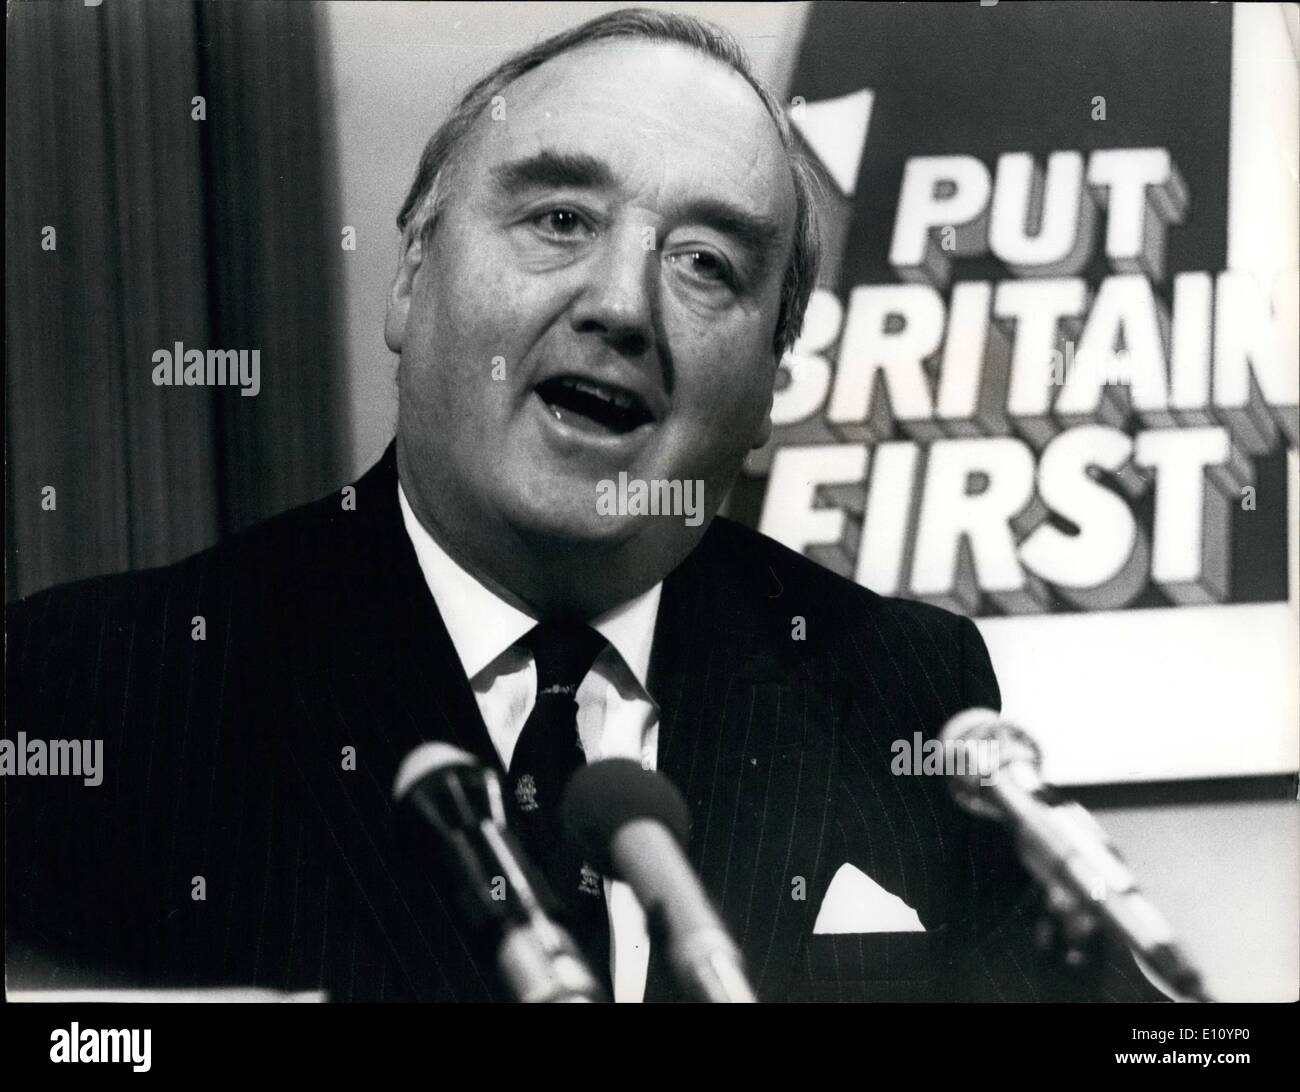 Sep. 09, 1974 - The Election campaign gets underway - The Conservatives hold press conference in London. Photo shows Willie Whitelaw, Chairman, speaking at today's Conservative Party press conference in London today. Stock Photo